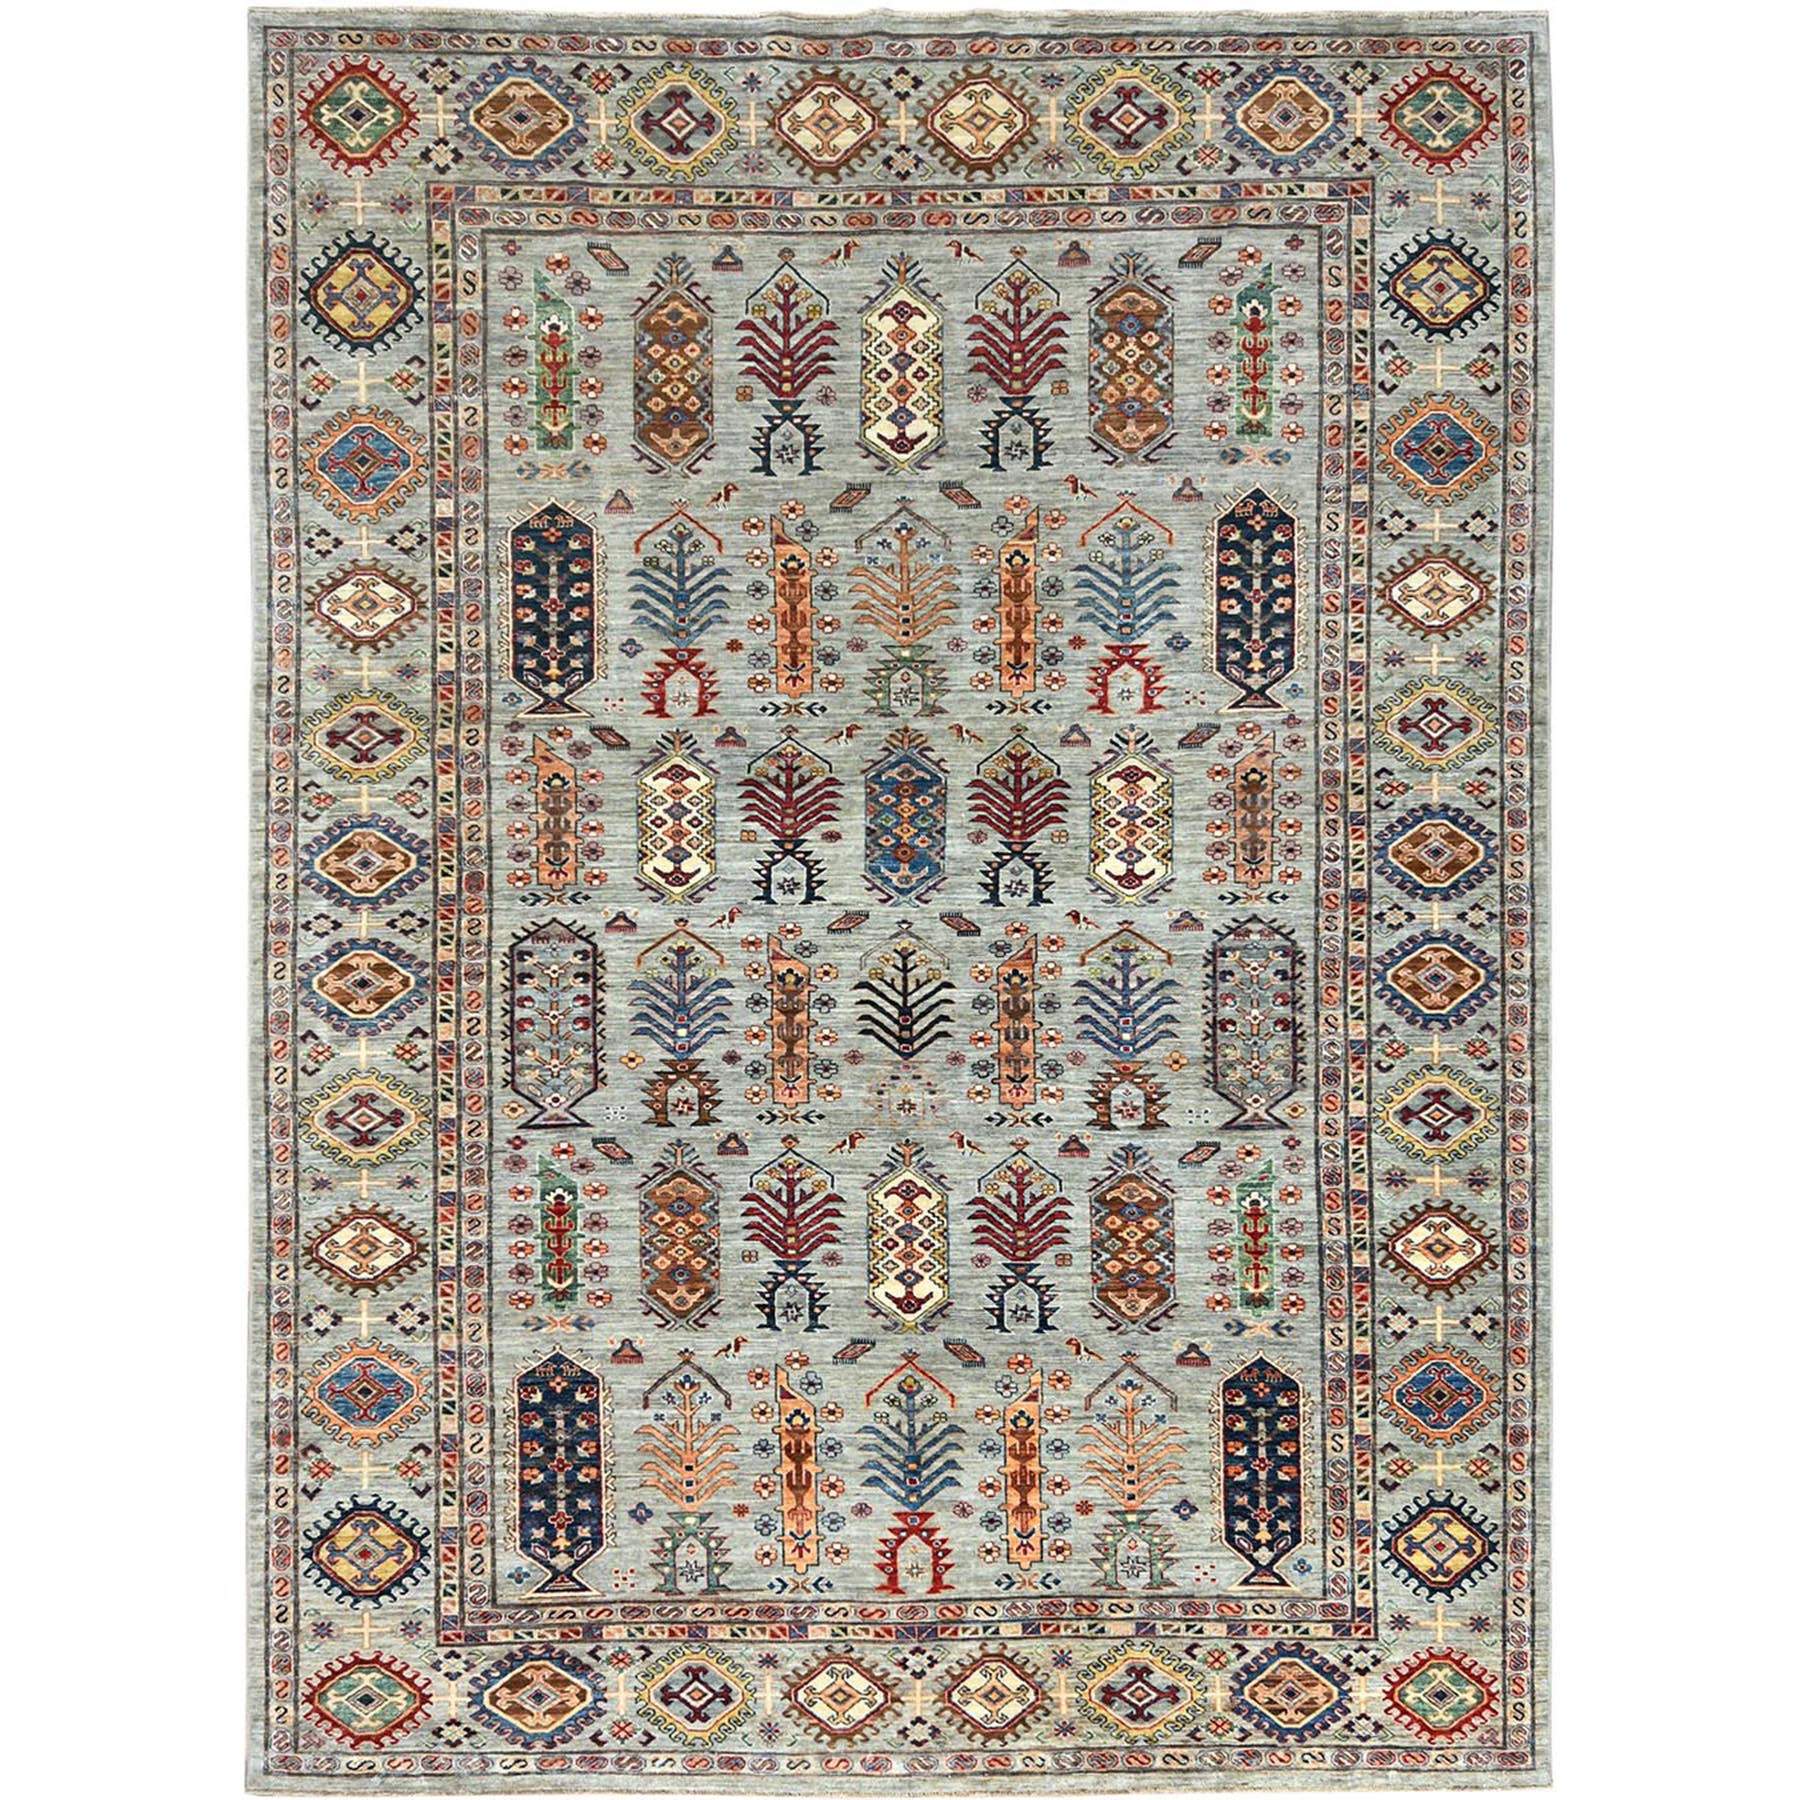 8'10"x12'2" Gray, Dense Weave Extra Soft Wool, Hand Woven Afghan Super Kazak with Repetitive Tree Design, Vegetable Dyes, Oriental Rug 